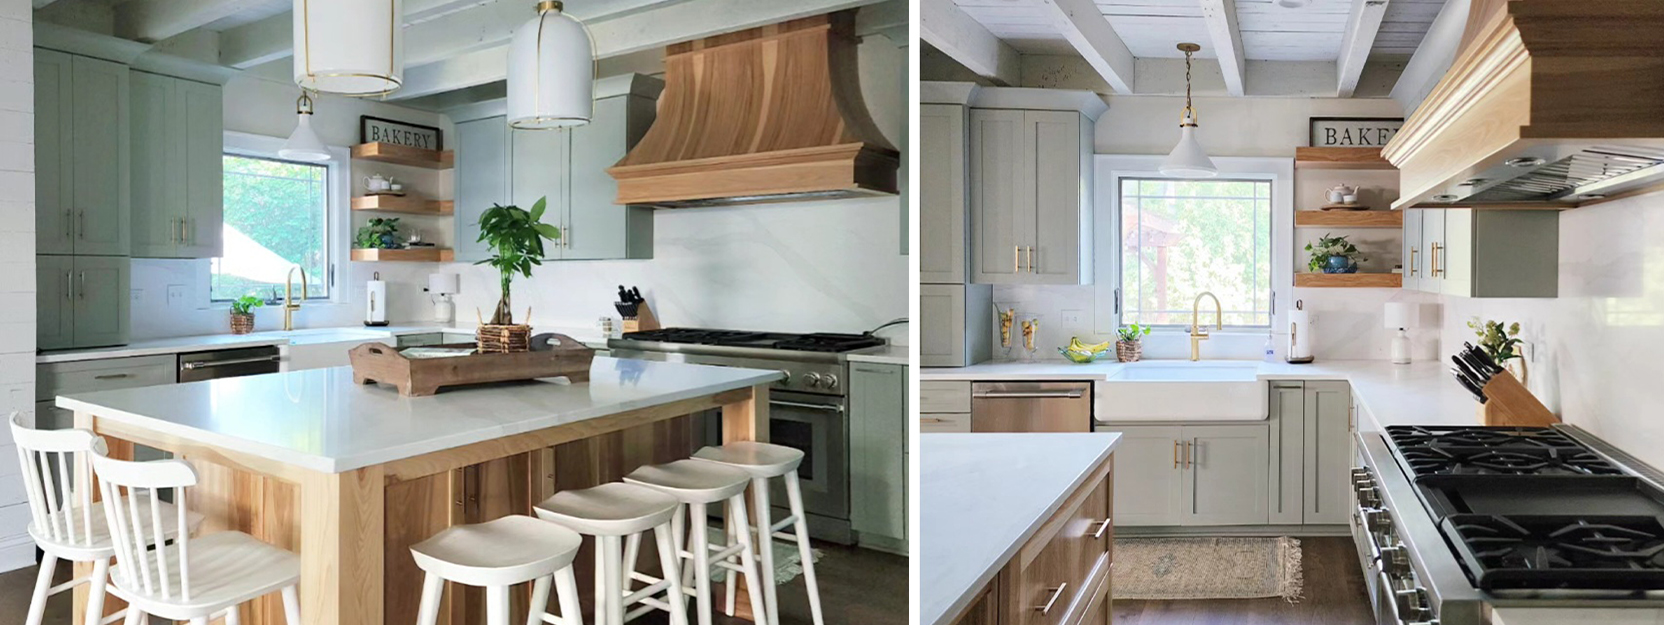 Modern transitional kitchen with large center island surrounded by white chairs, wood paneled island and range hood with some open shelving and light greenish gray cabinetry.